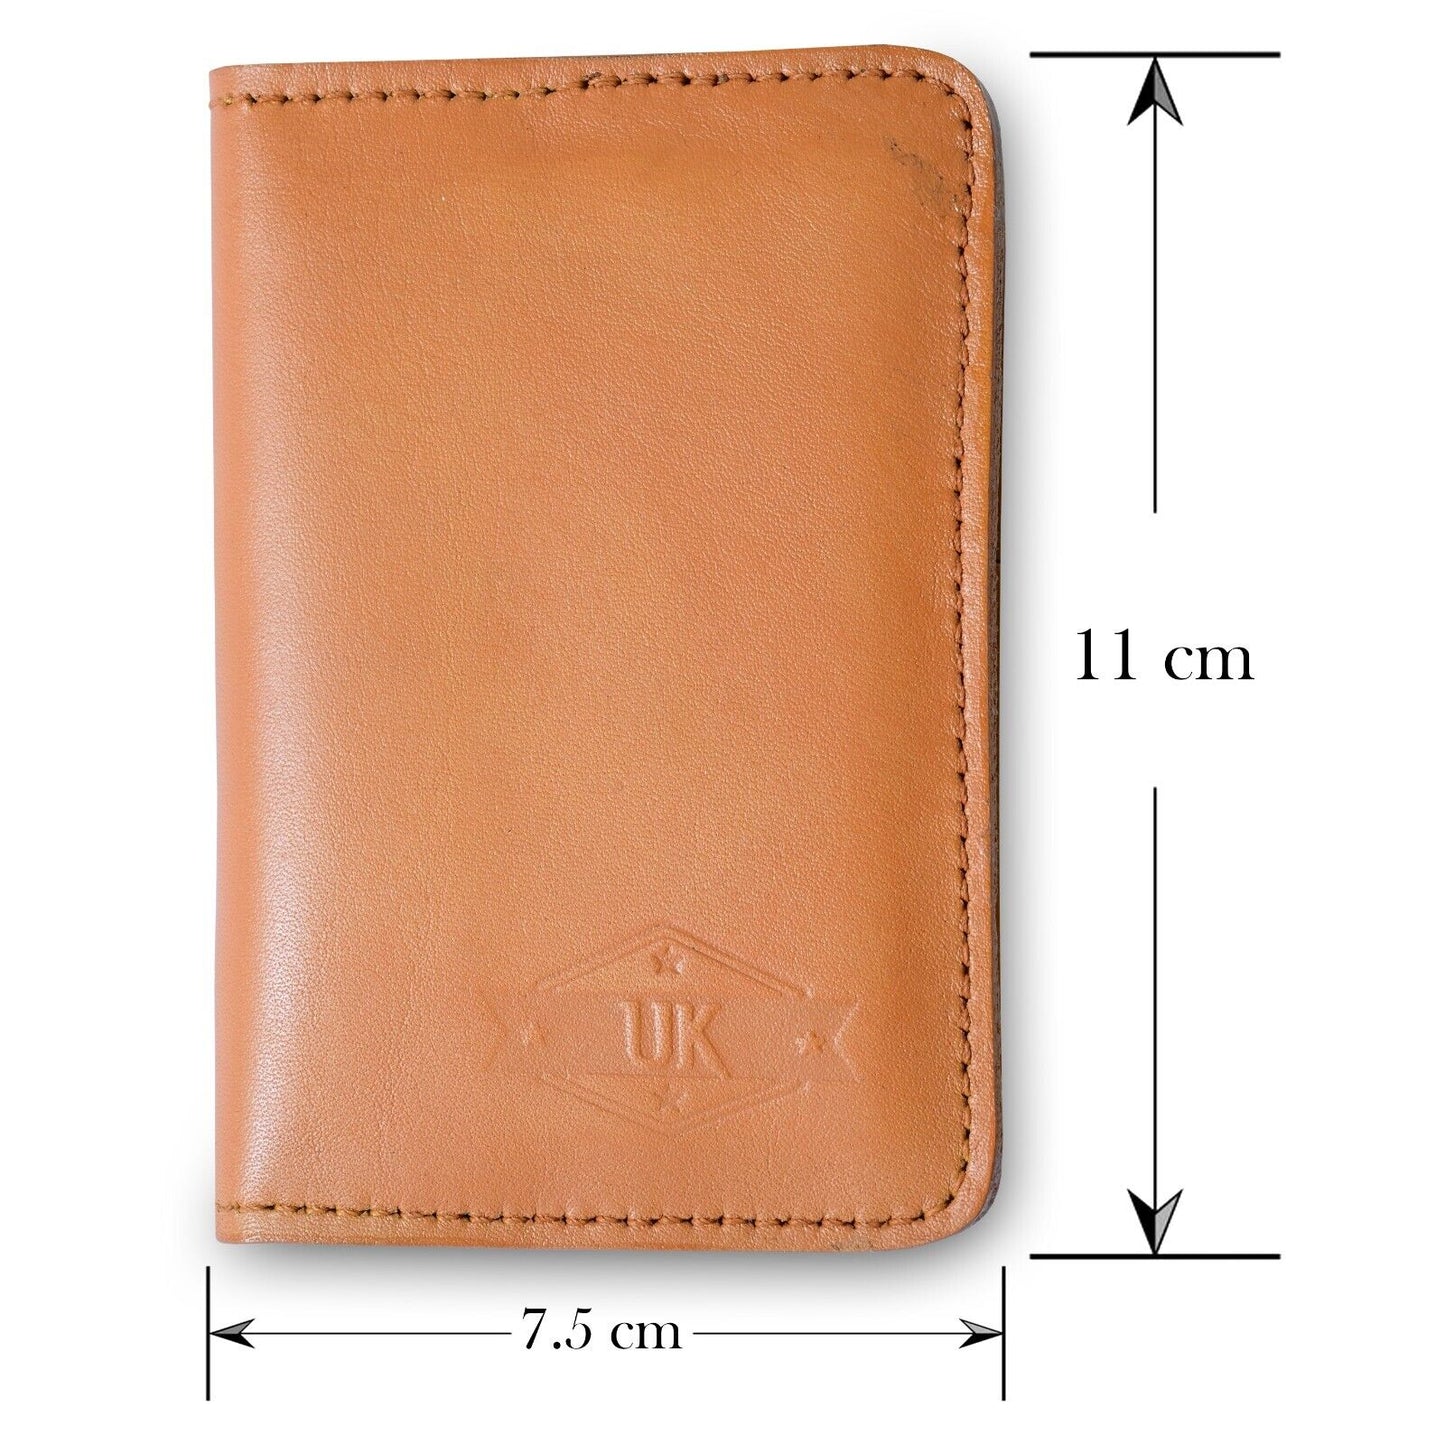 Genuine Leather Wallet - Classic Men's Bifold Wallet - Gift For Mens Mini Wallet Colors Green And Light Brown